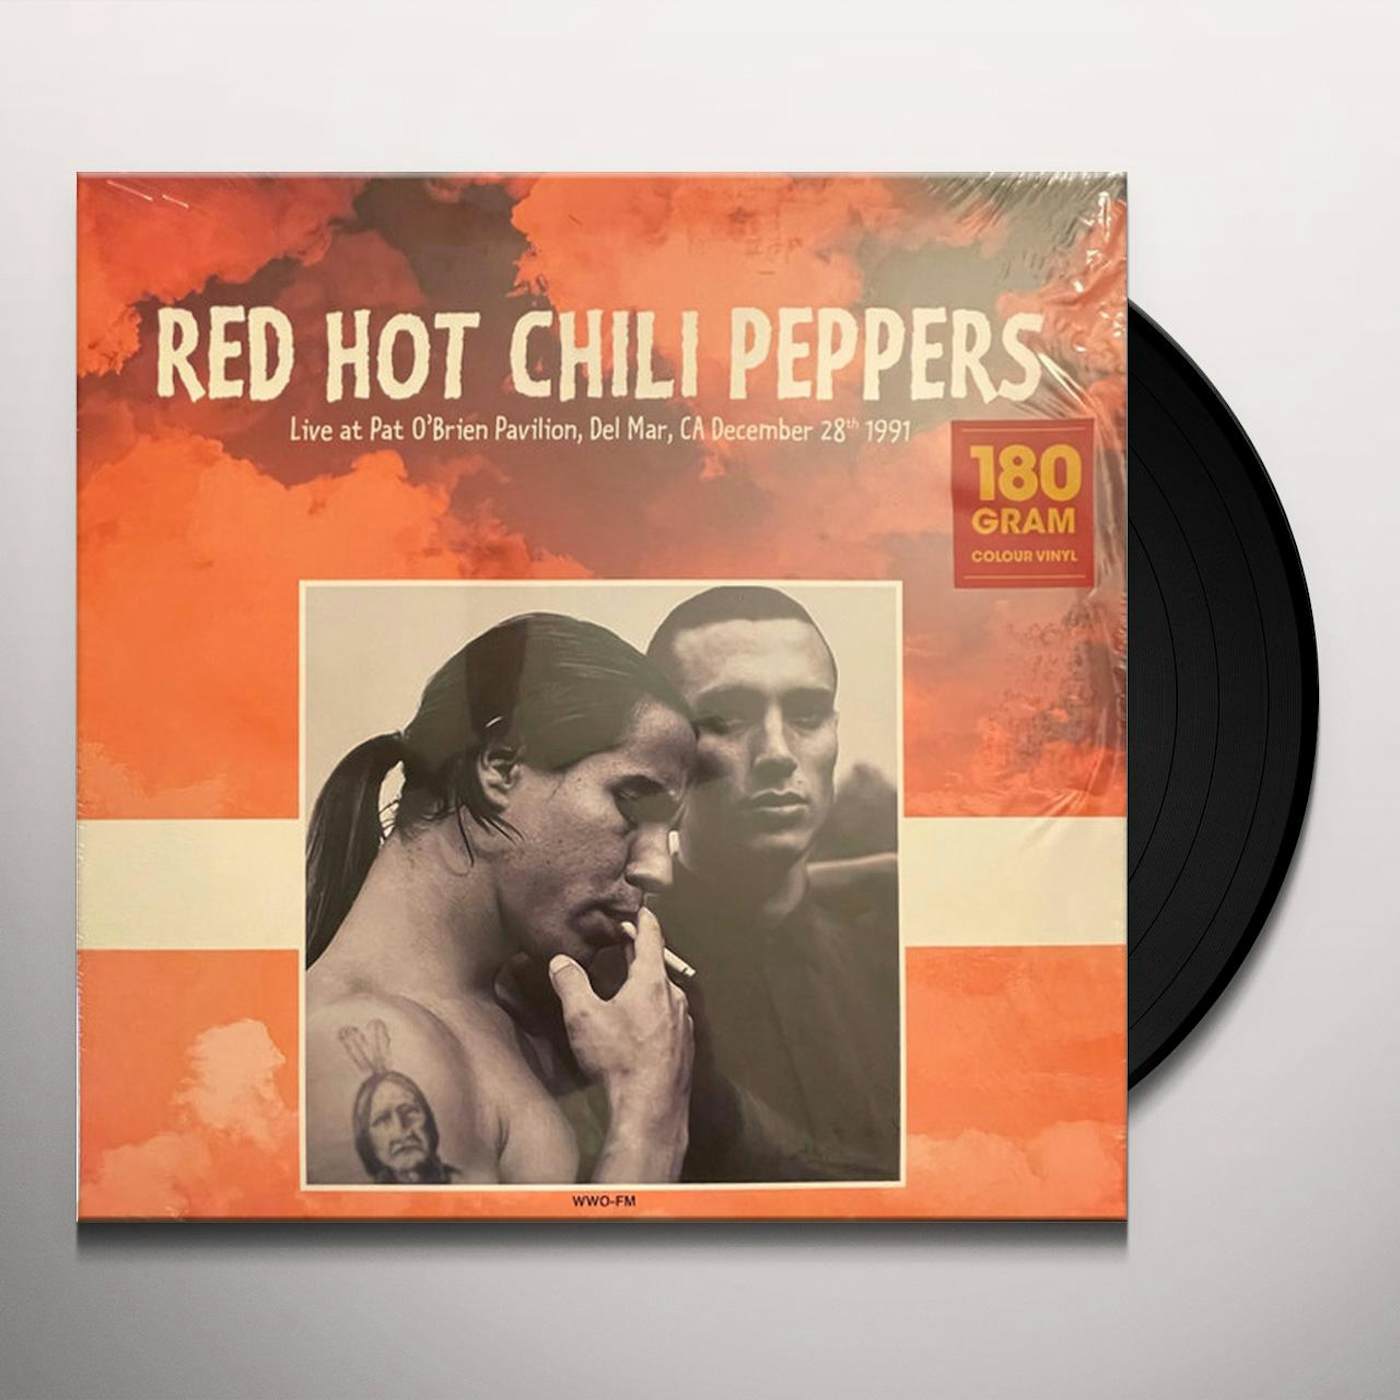 Red Hot Chili Peppers LIVE AT PAT O'BRIEN PAVILION DEL MAR CA DECEMBER 28TH 1991 Vinyl Record